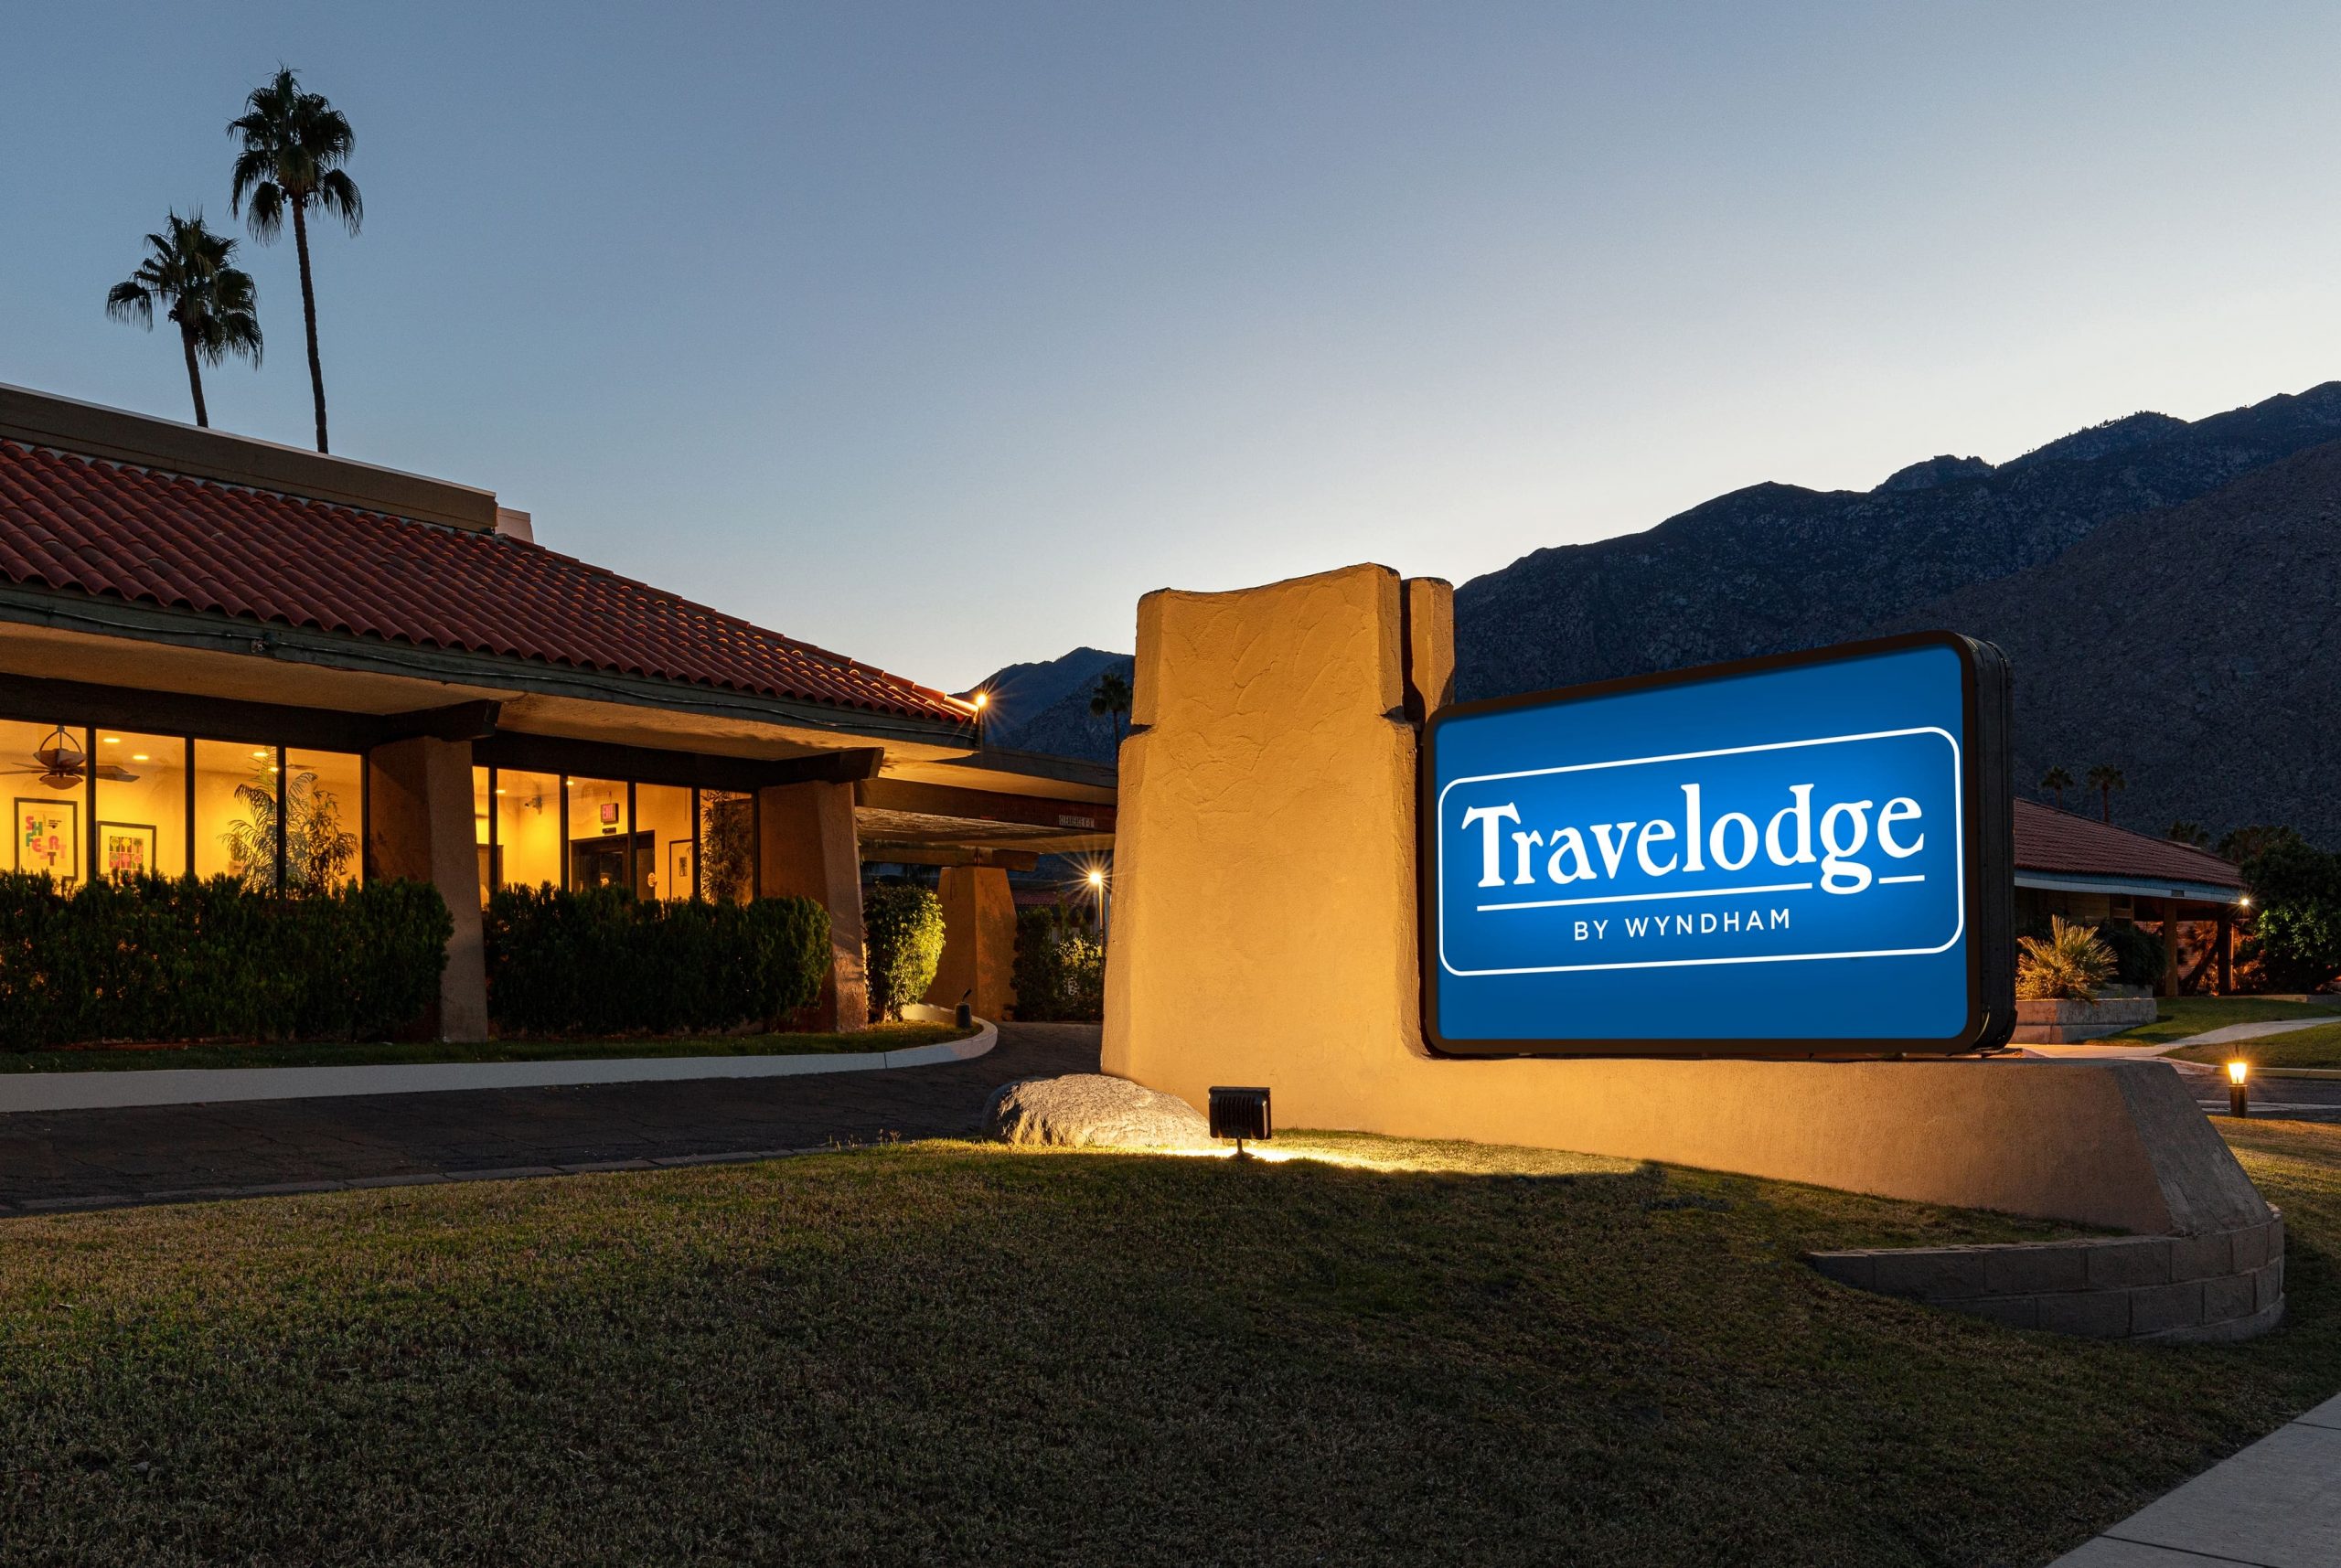 Experience Unforgettable Stays at Travelodge by Wyndham: A Guide to Affordable and Comfortable Accommodations